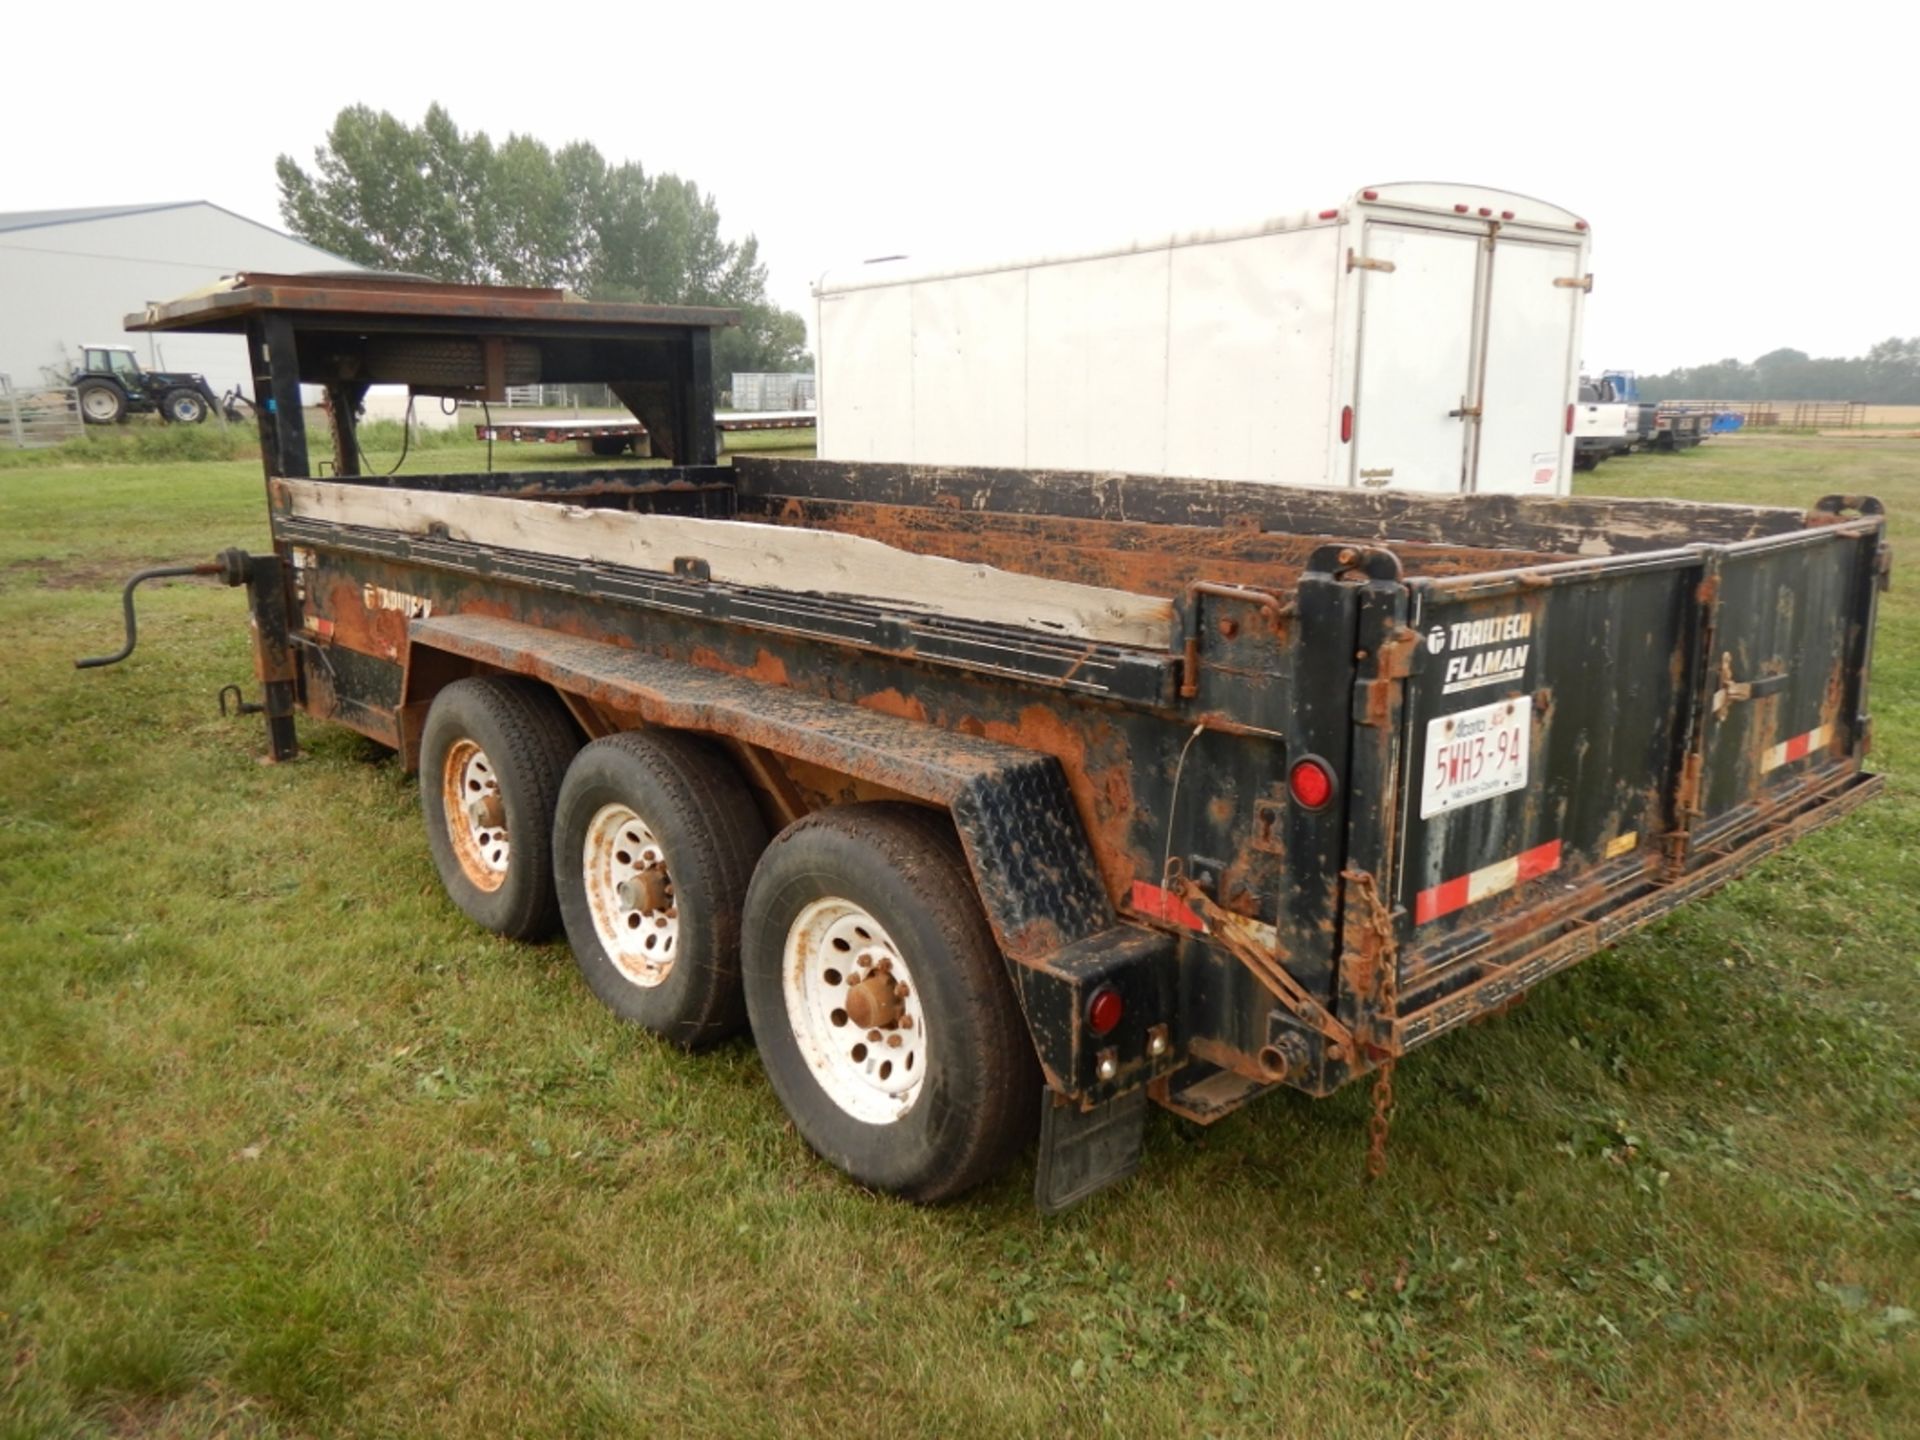 2008 TRAILTECH 16FT GN HYD. DUMP TRAILER, TRI-AXLE, 21,000 GVWR, W/ GN DECK, RAMPS, 13,200LBS - Image 2 of 15